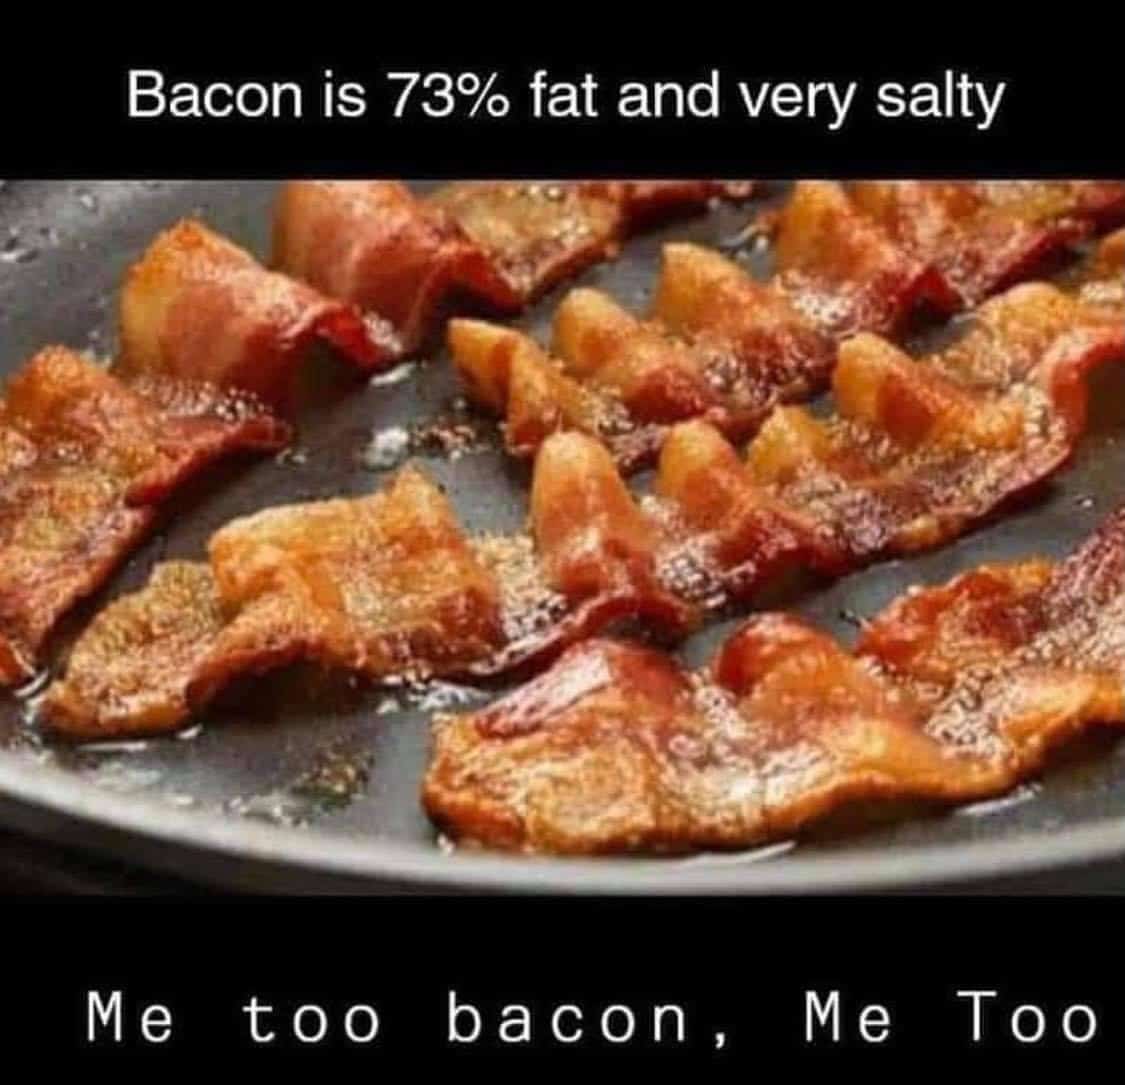 Bacon cooking in a skillet and text: Bacon is 73% fat and very salty. Me too bacon, Me Too.